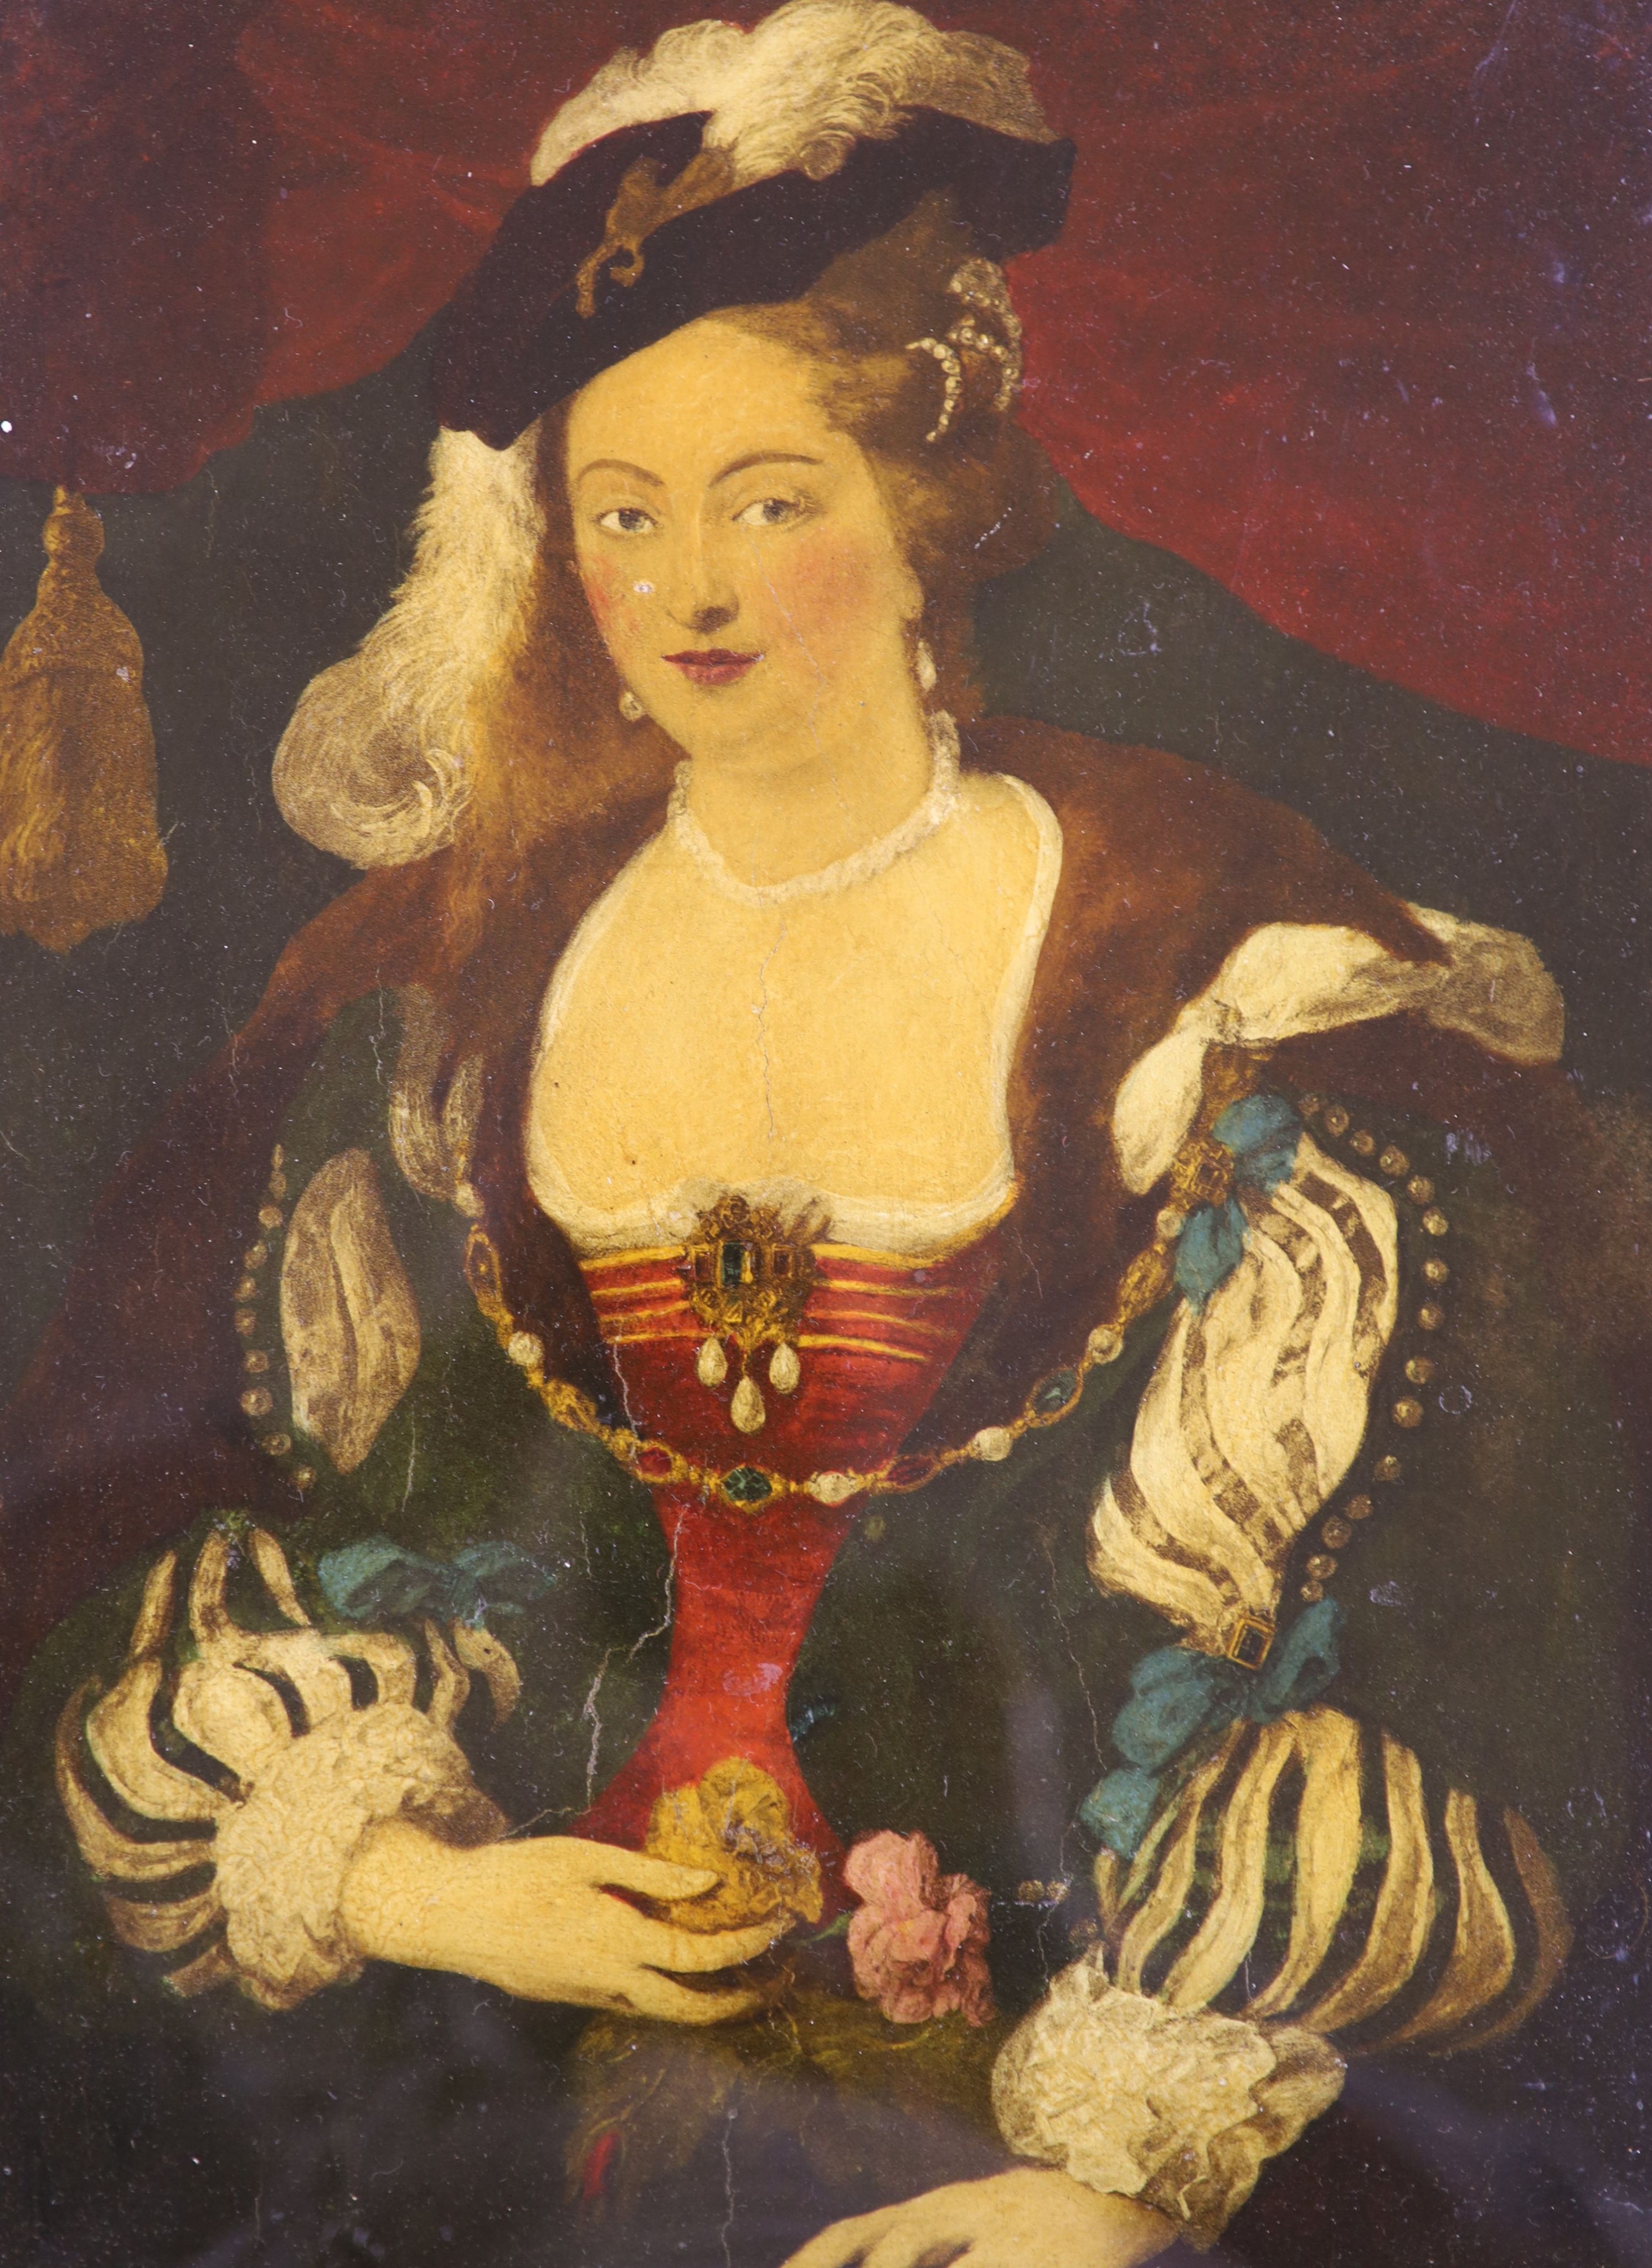 After William Hogarth, reverse print on glass, Marriage-à-la-Mode, plate 6, 25 x 35cm and a later reverse print on glass, Portrait of a lady, 35 x 27cm